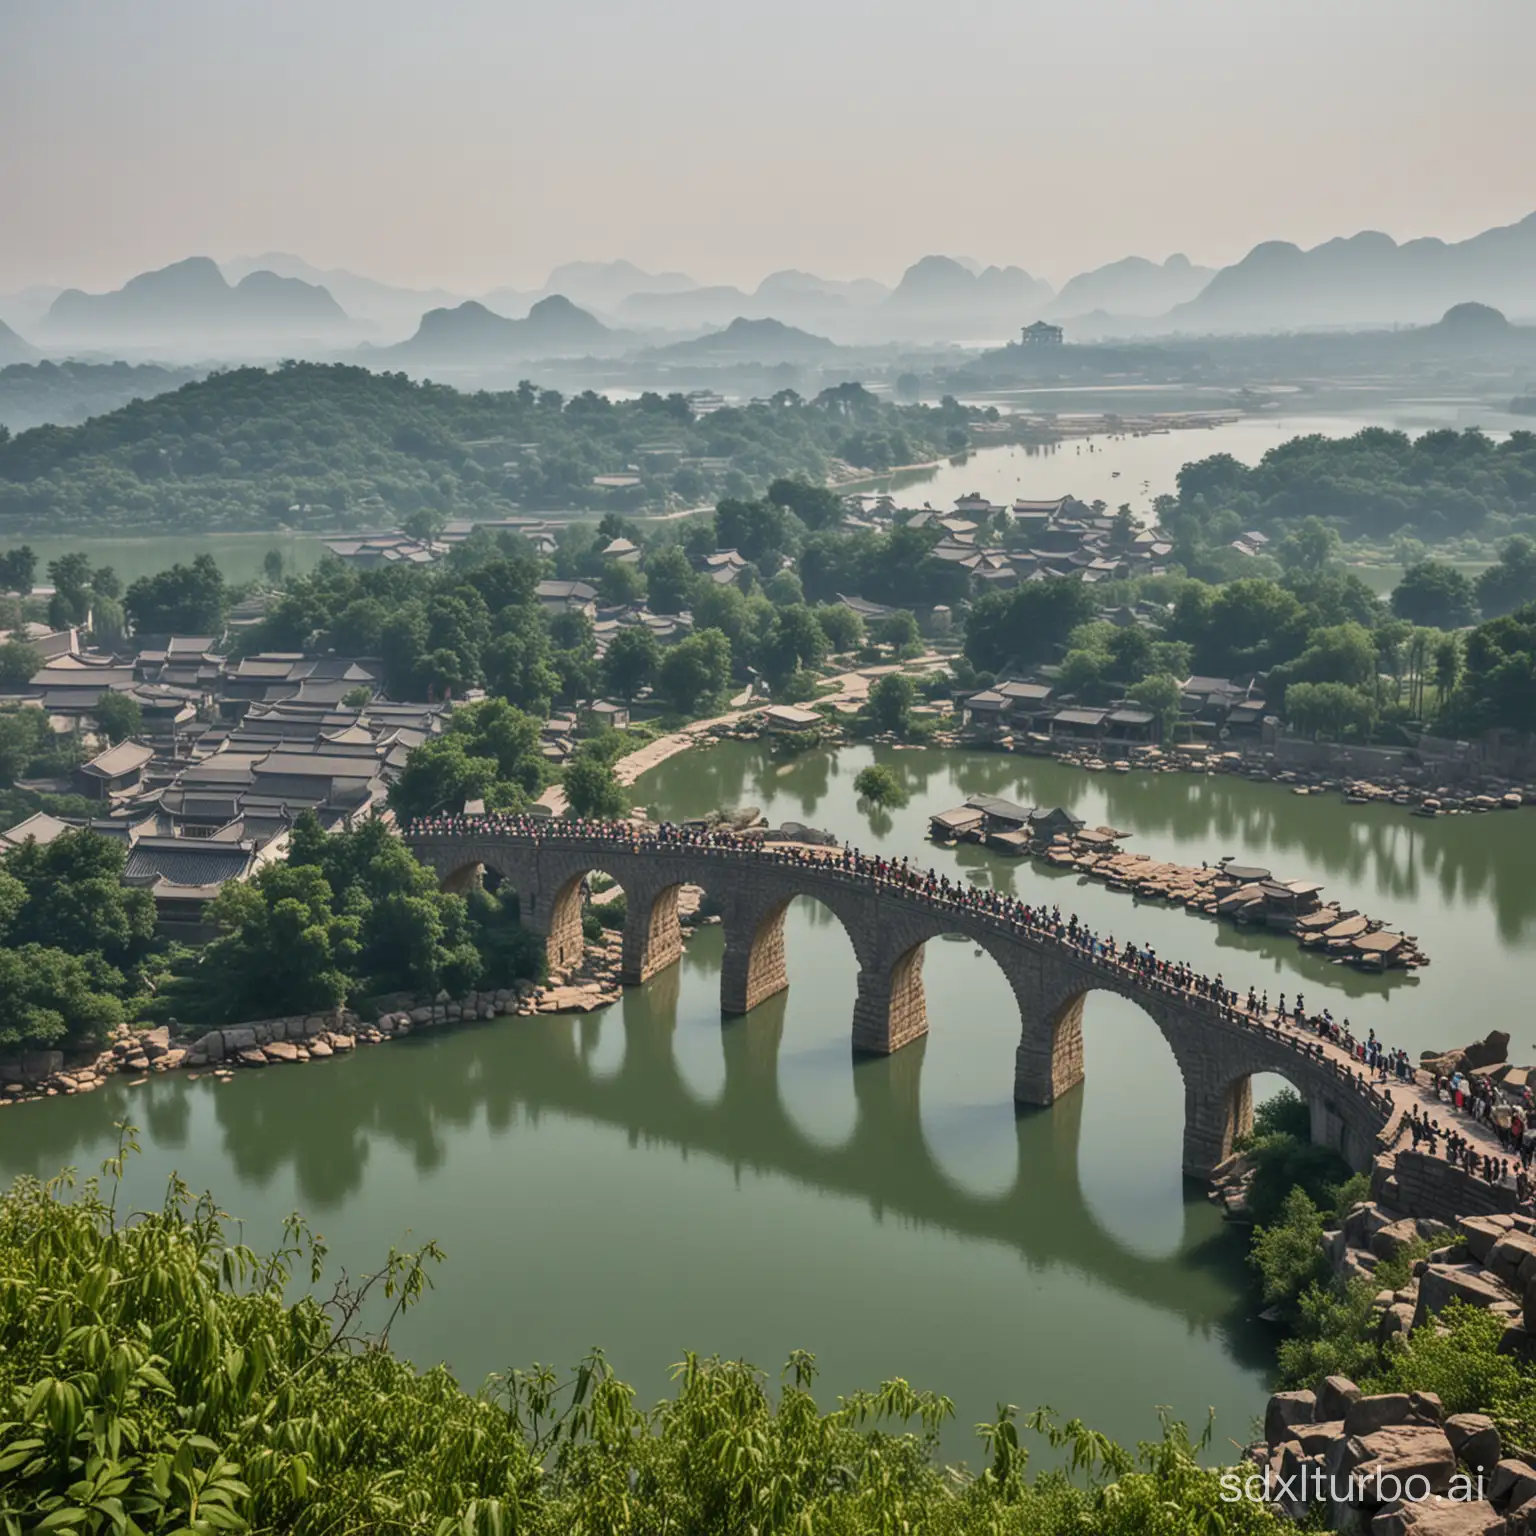 Majestic-Stone-Arch-Bridge-with-Farmers-and-Traditional-Chinese-Architecture-by-the-Lakeside